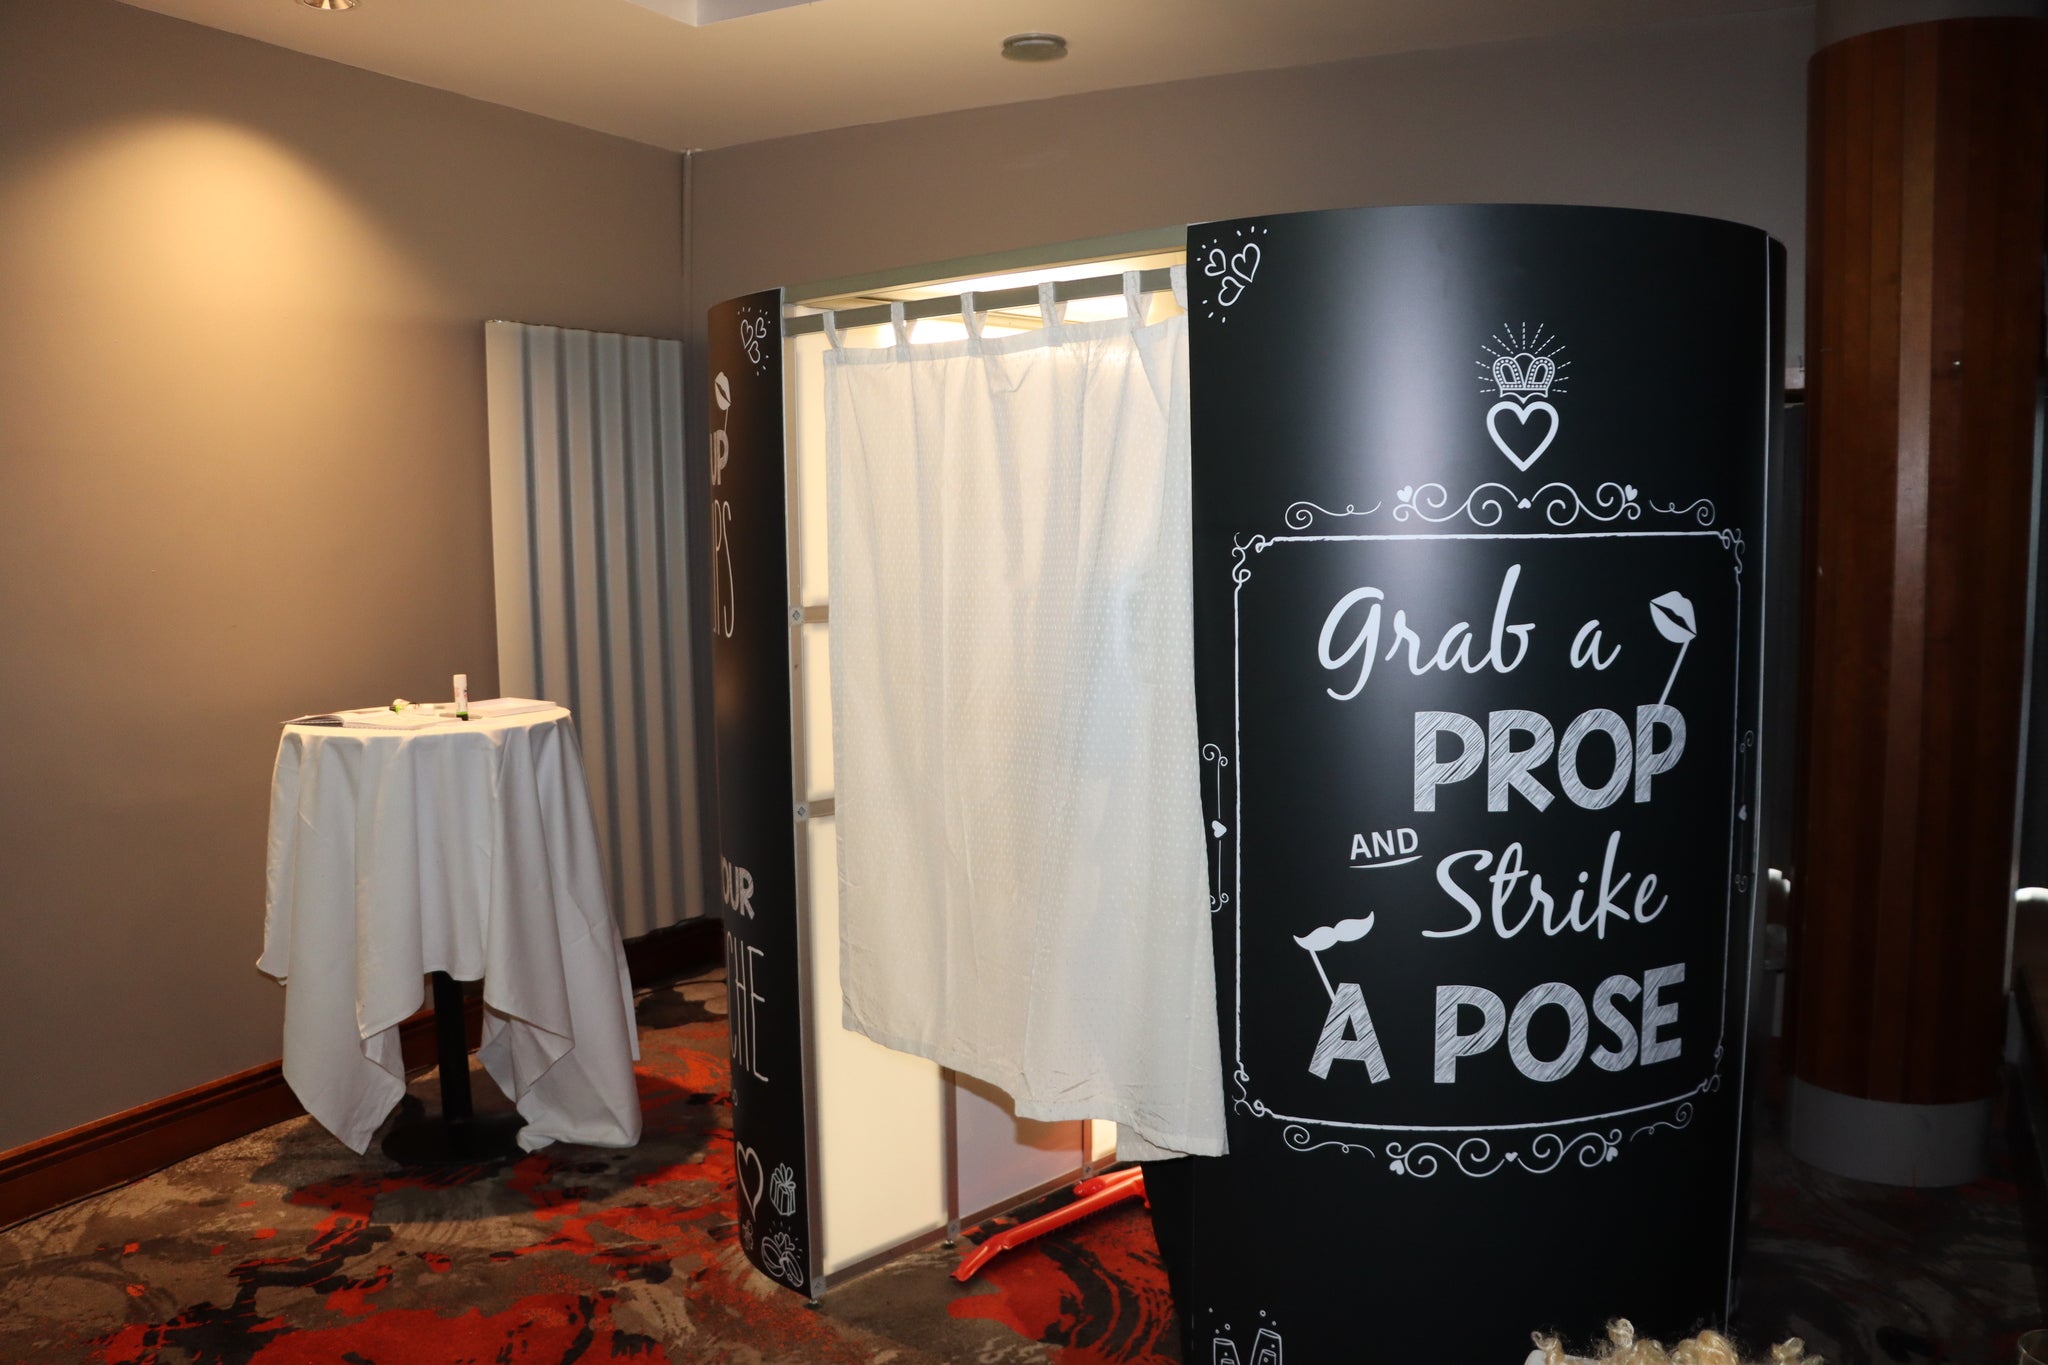 Vogue Photo Booth Rental: Strike a Pose in Style